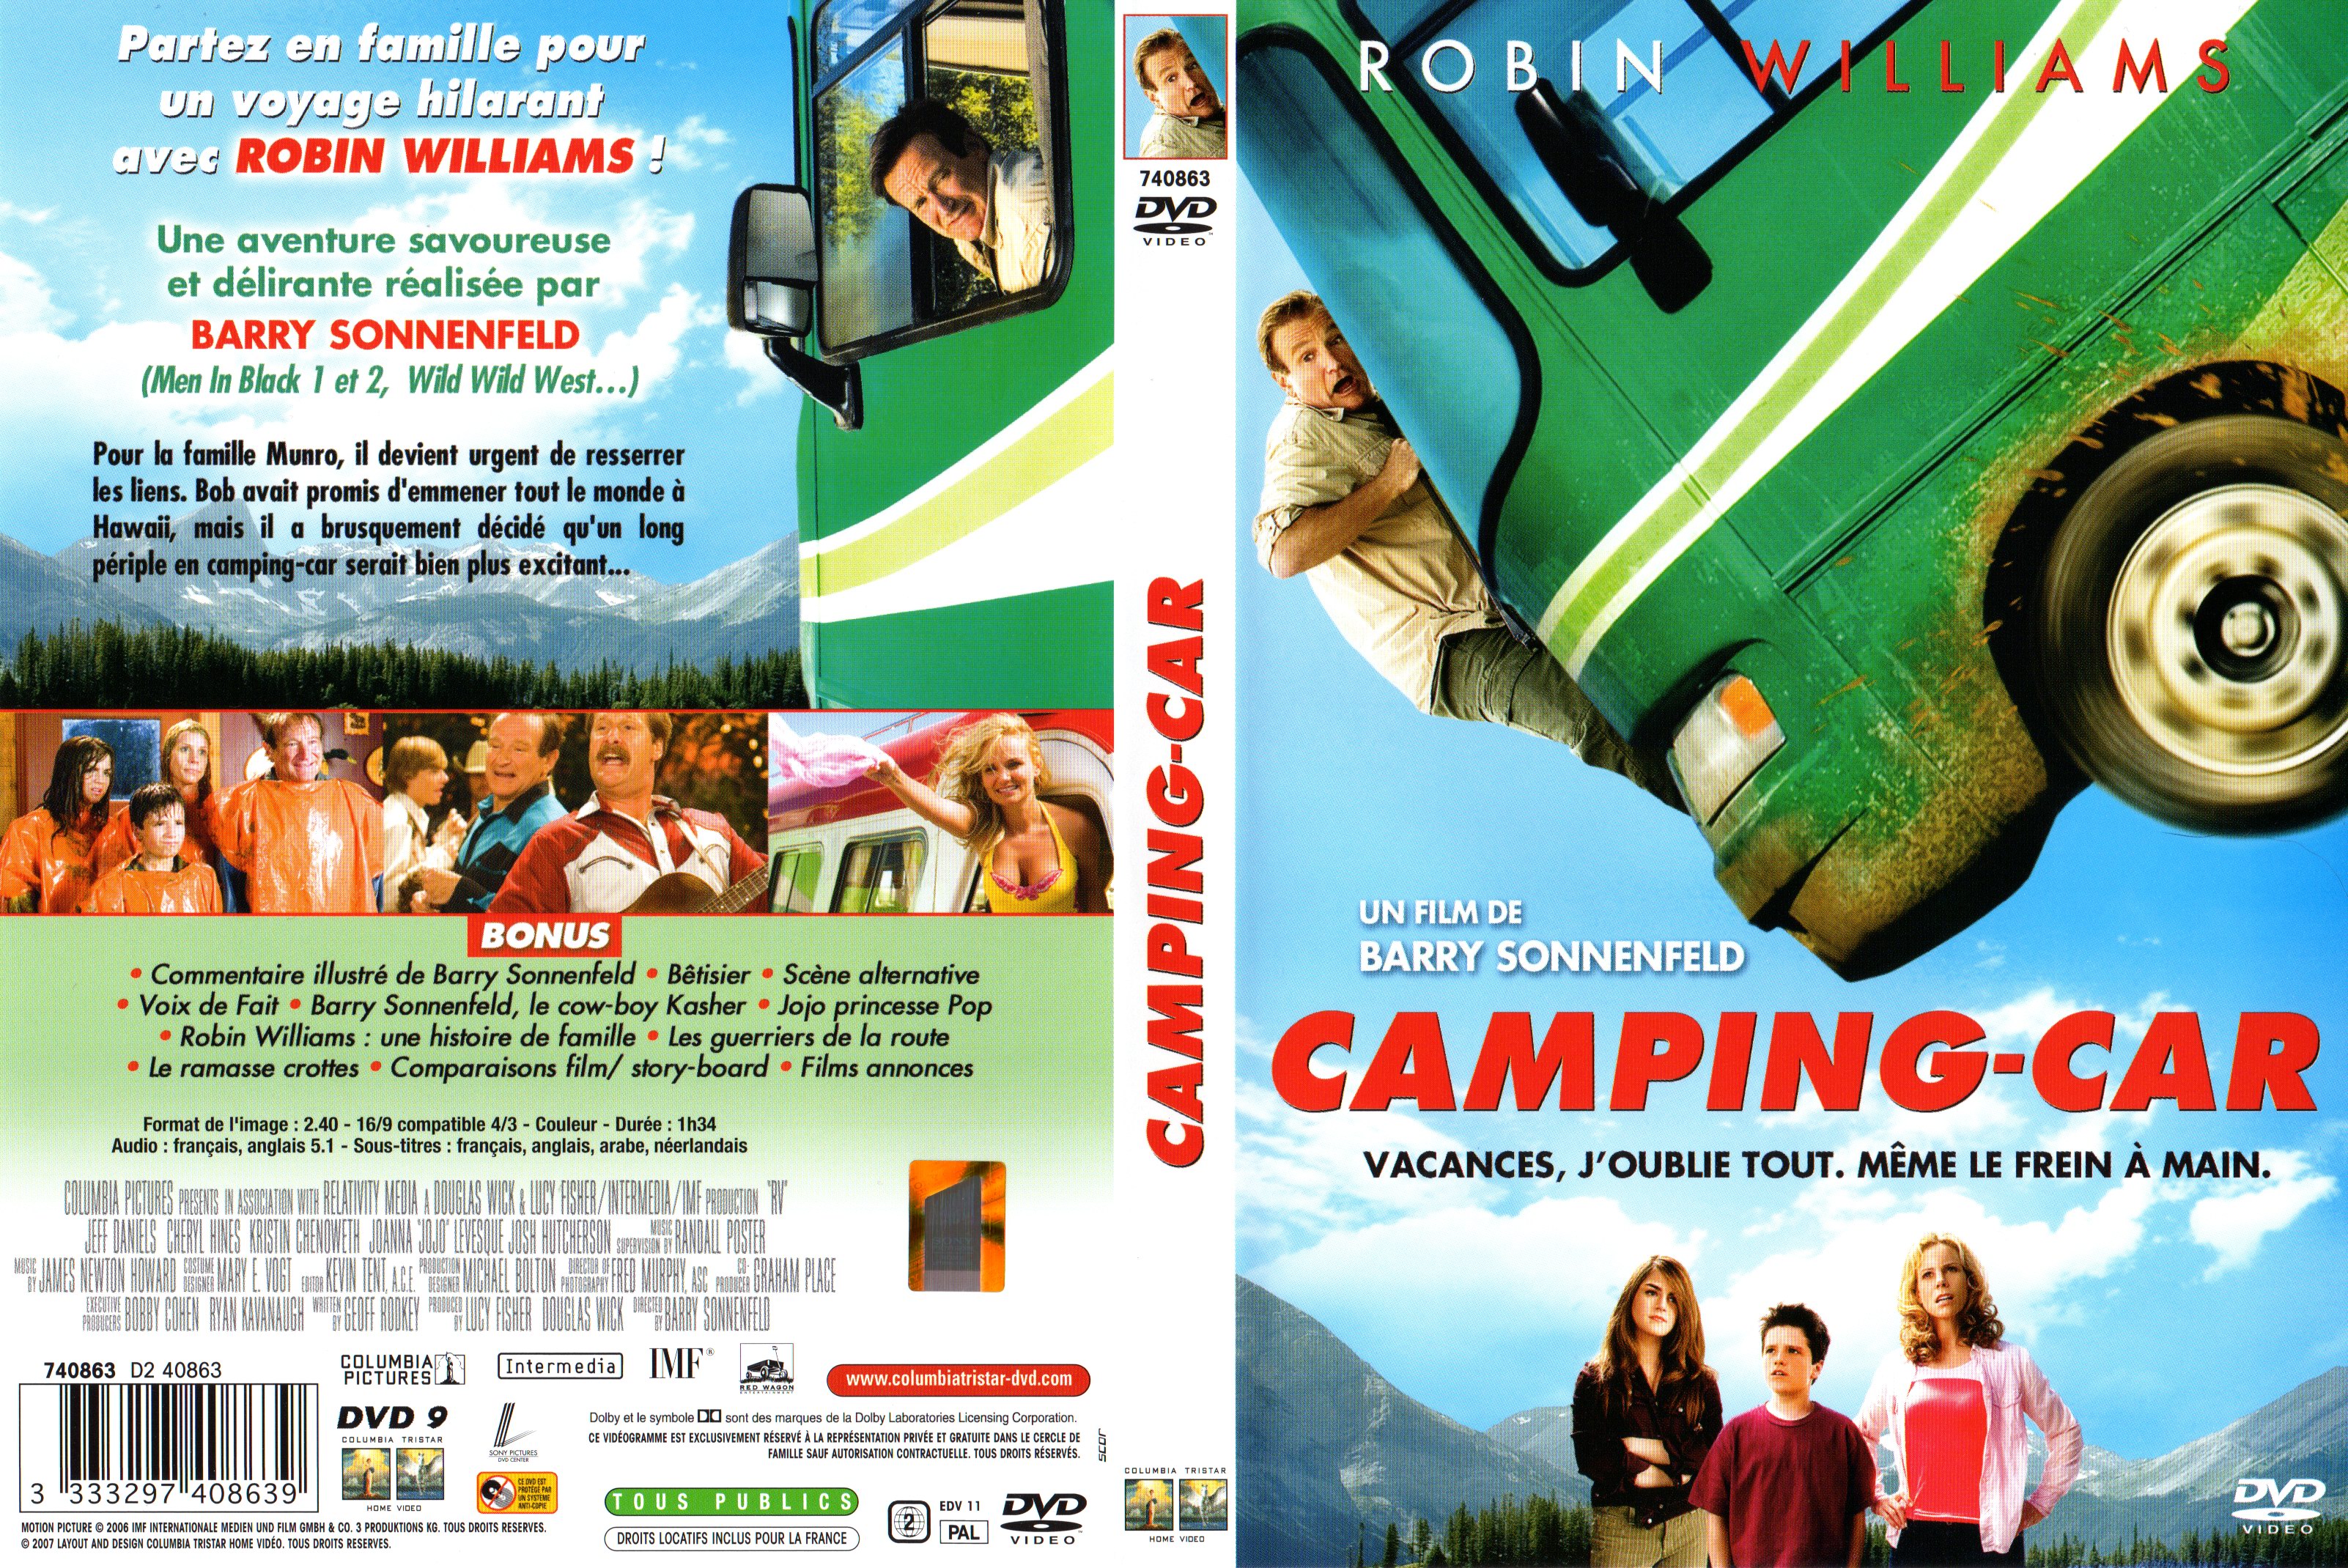 Jaquette DVD Camping car